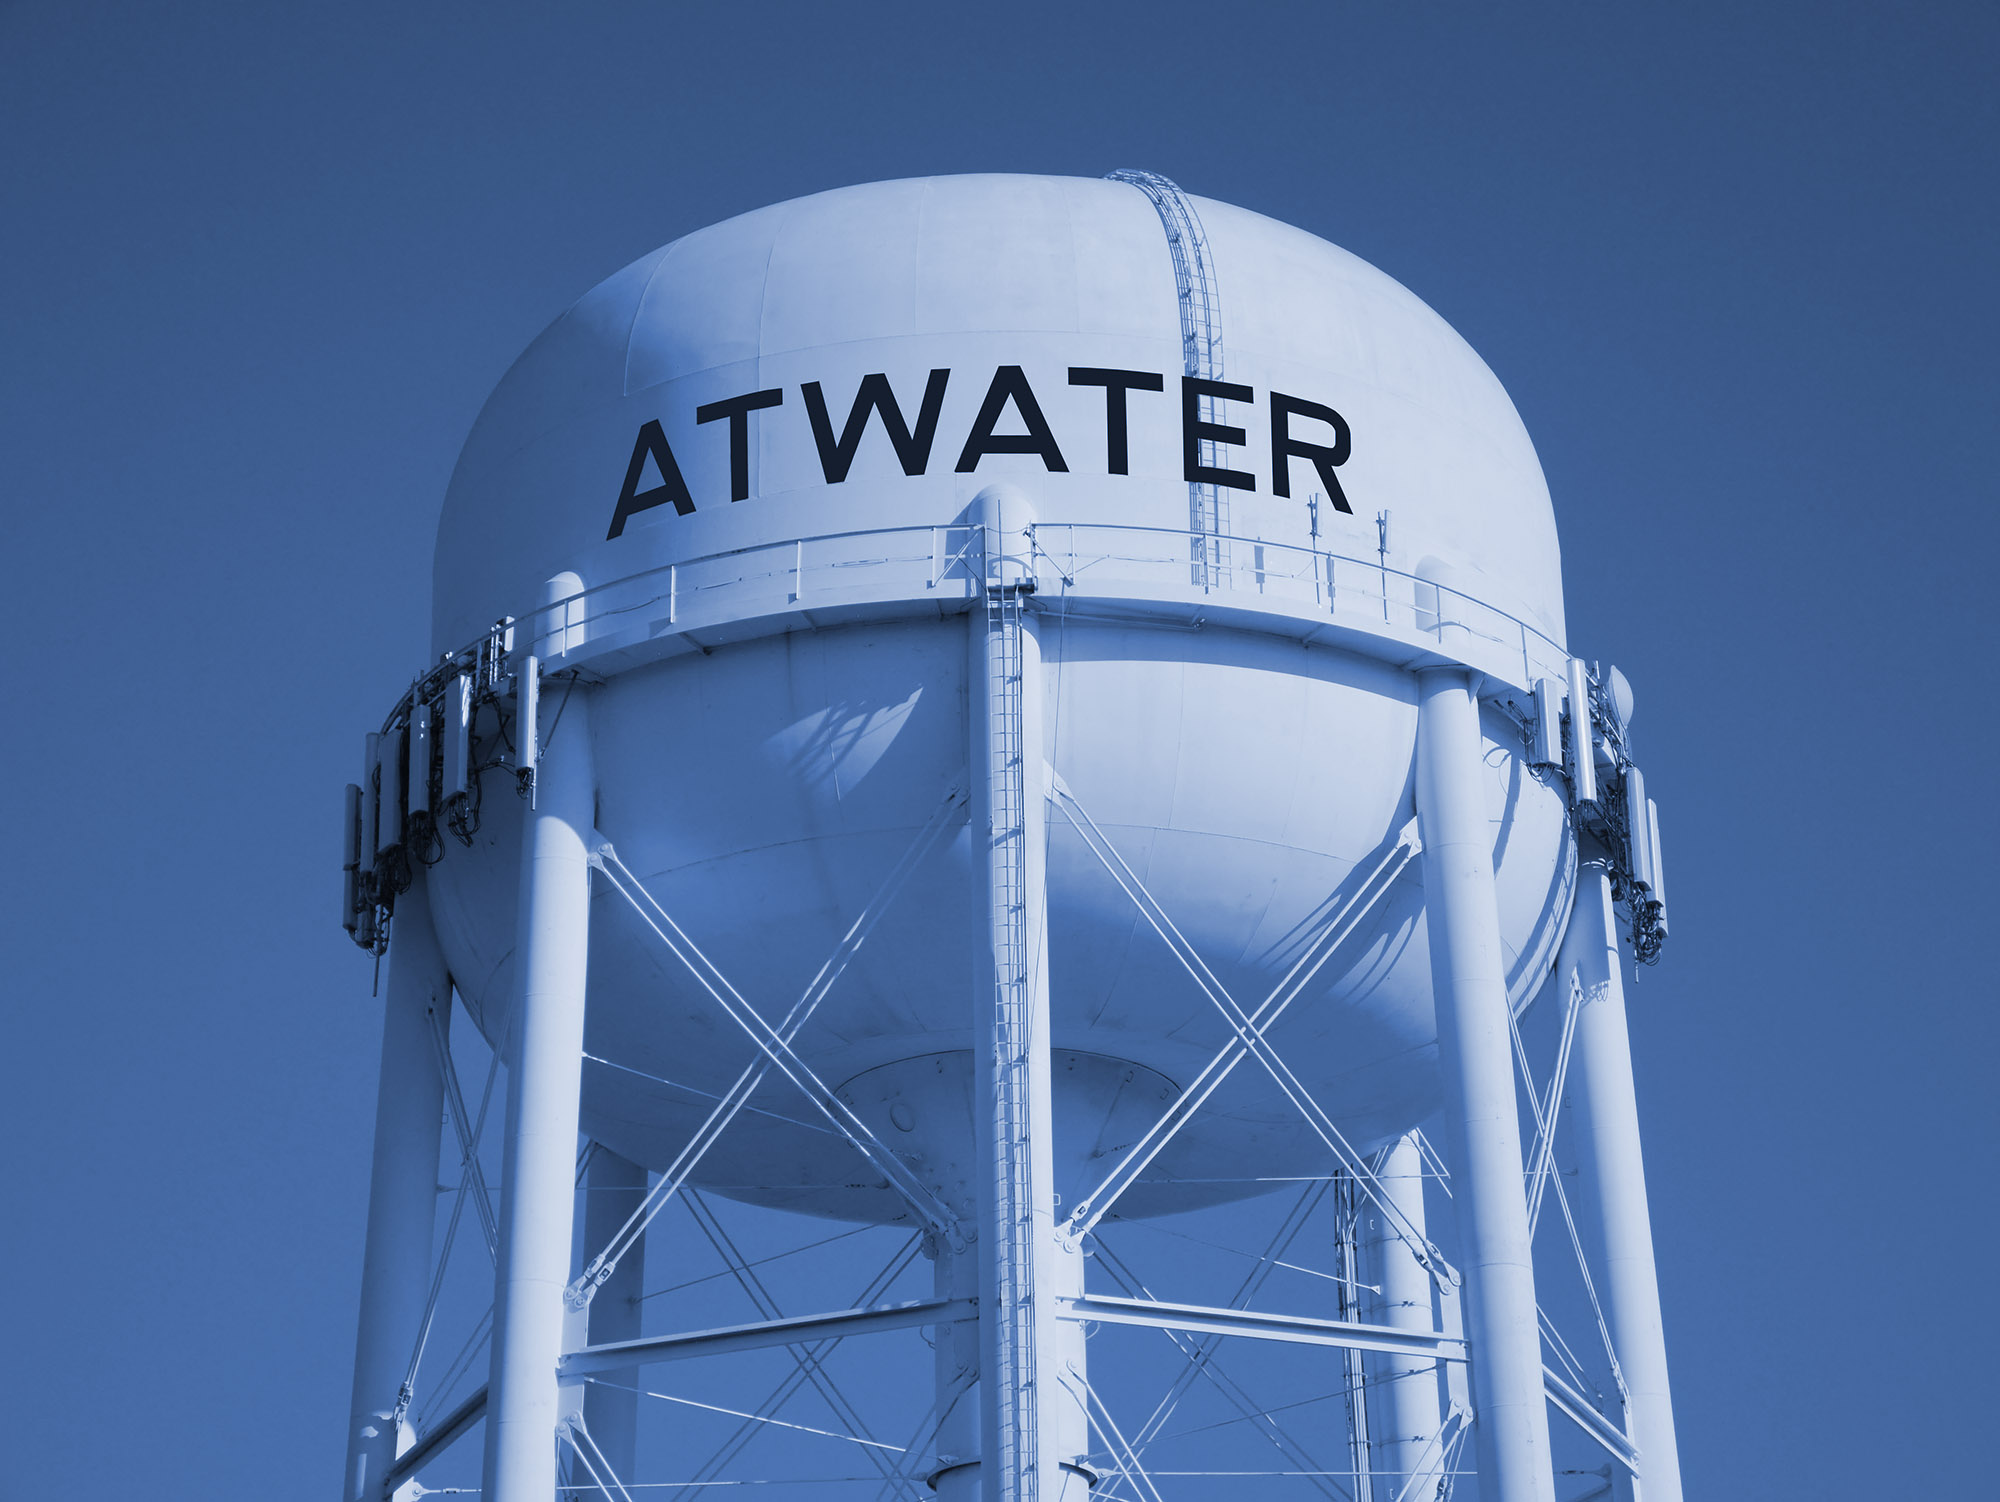 City of Atwater Business